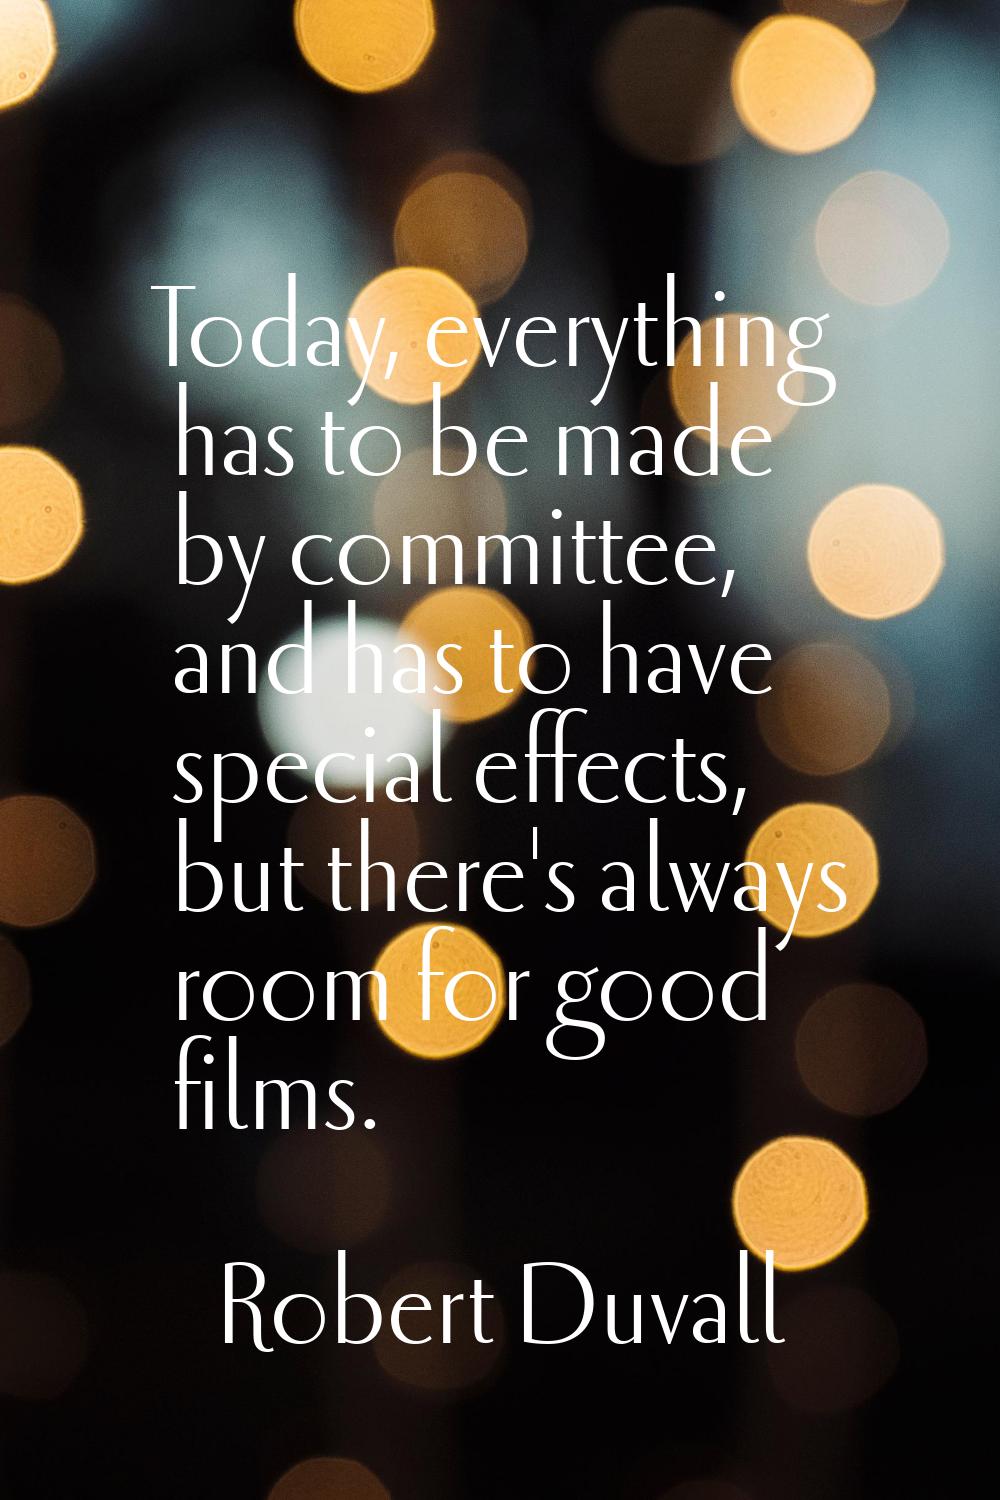 Today, everything has to be made by committee, and has to have special effects, but there's always 